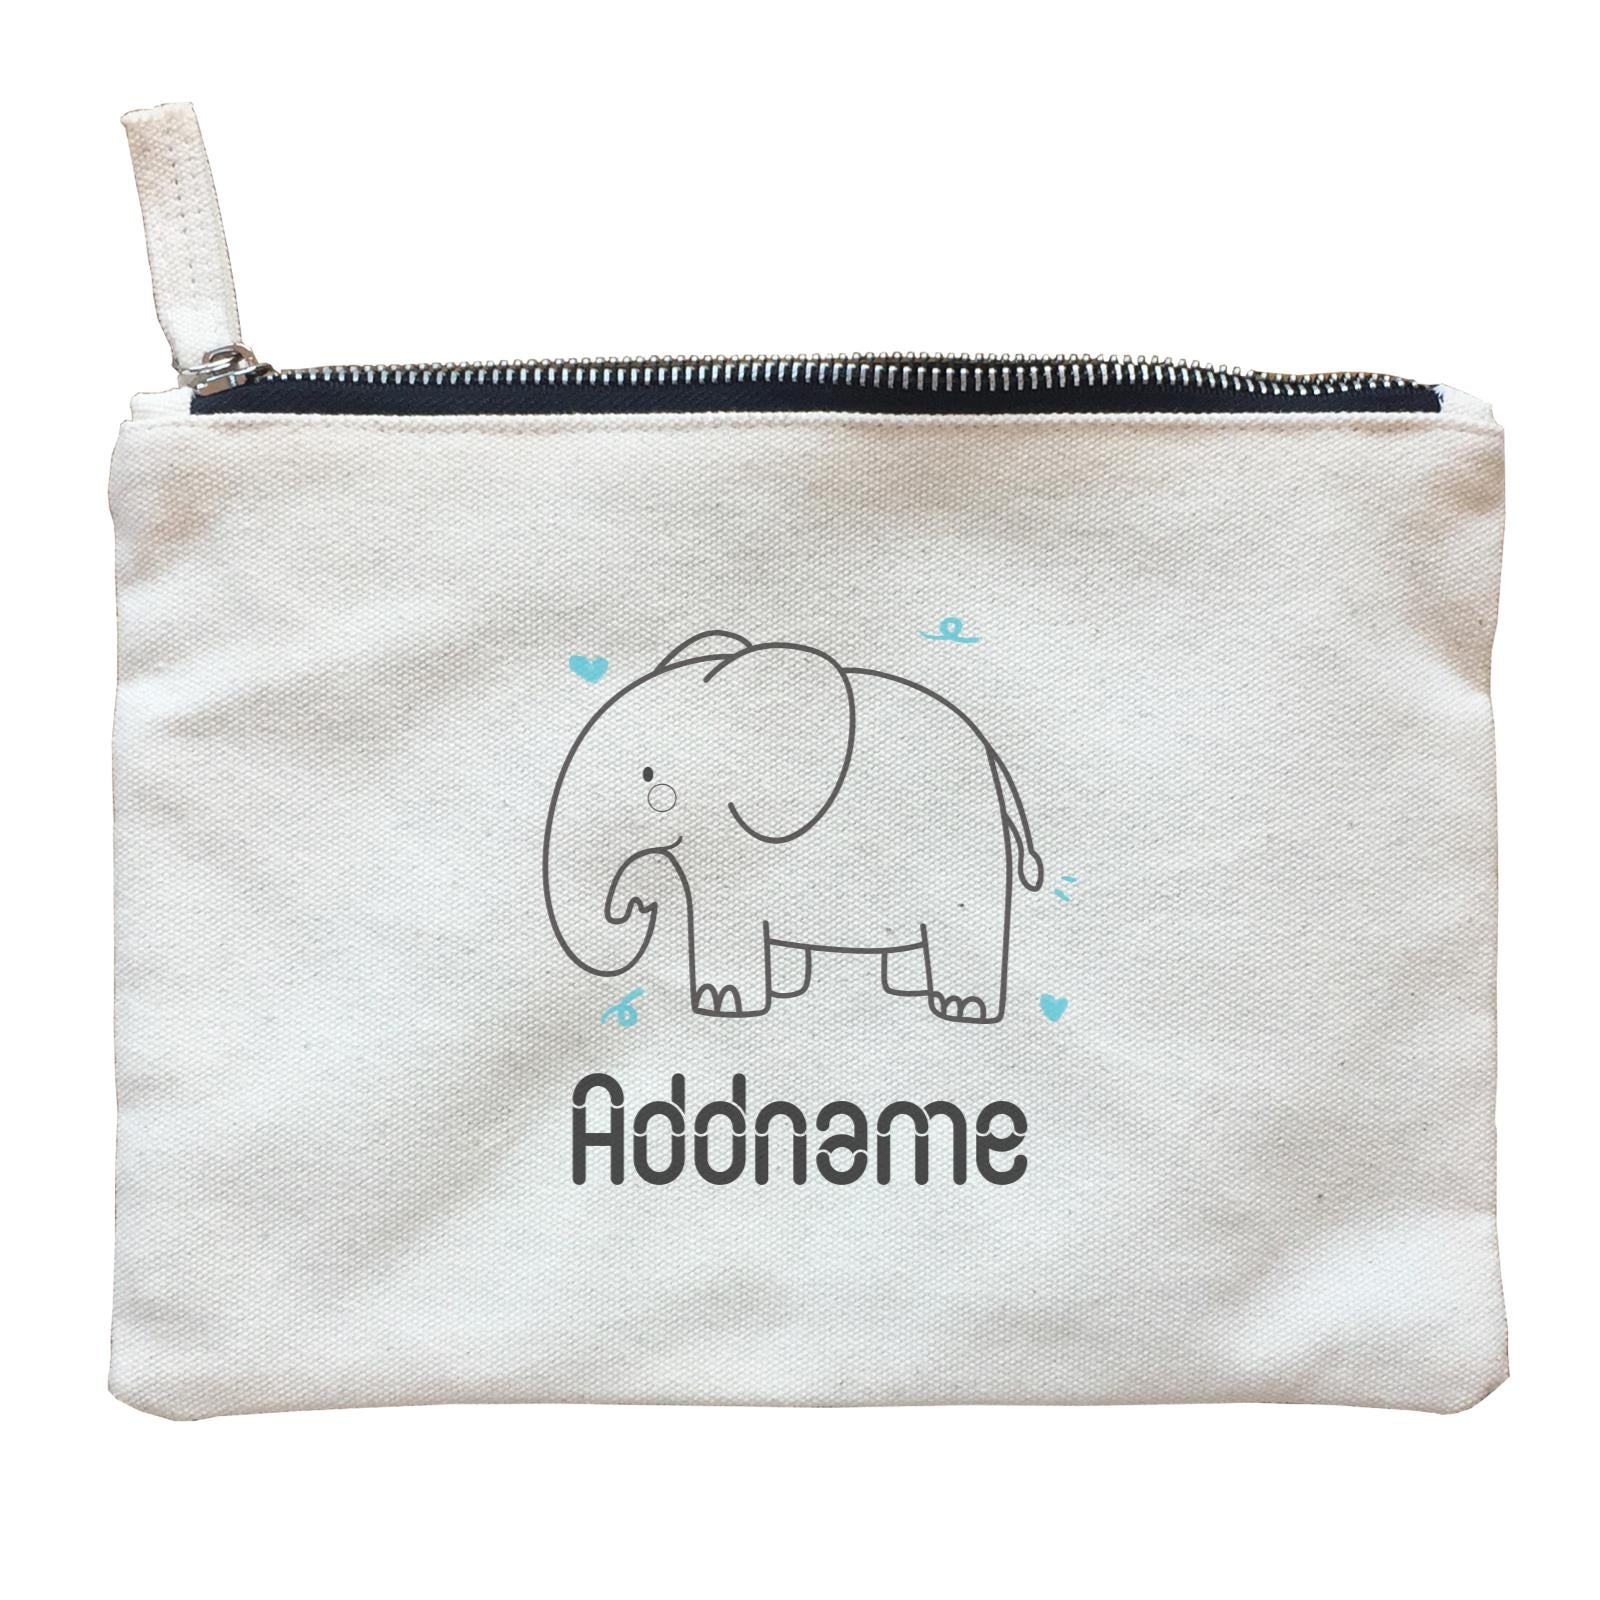 Coloring Outline Cute Hand Drawn Animals Elephants Blue Elephants Addname Zipper Pouch